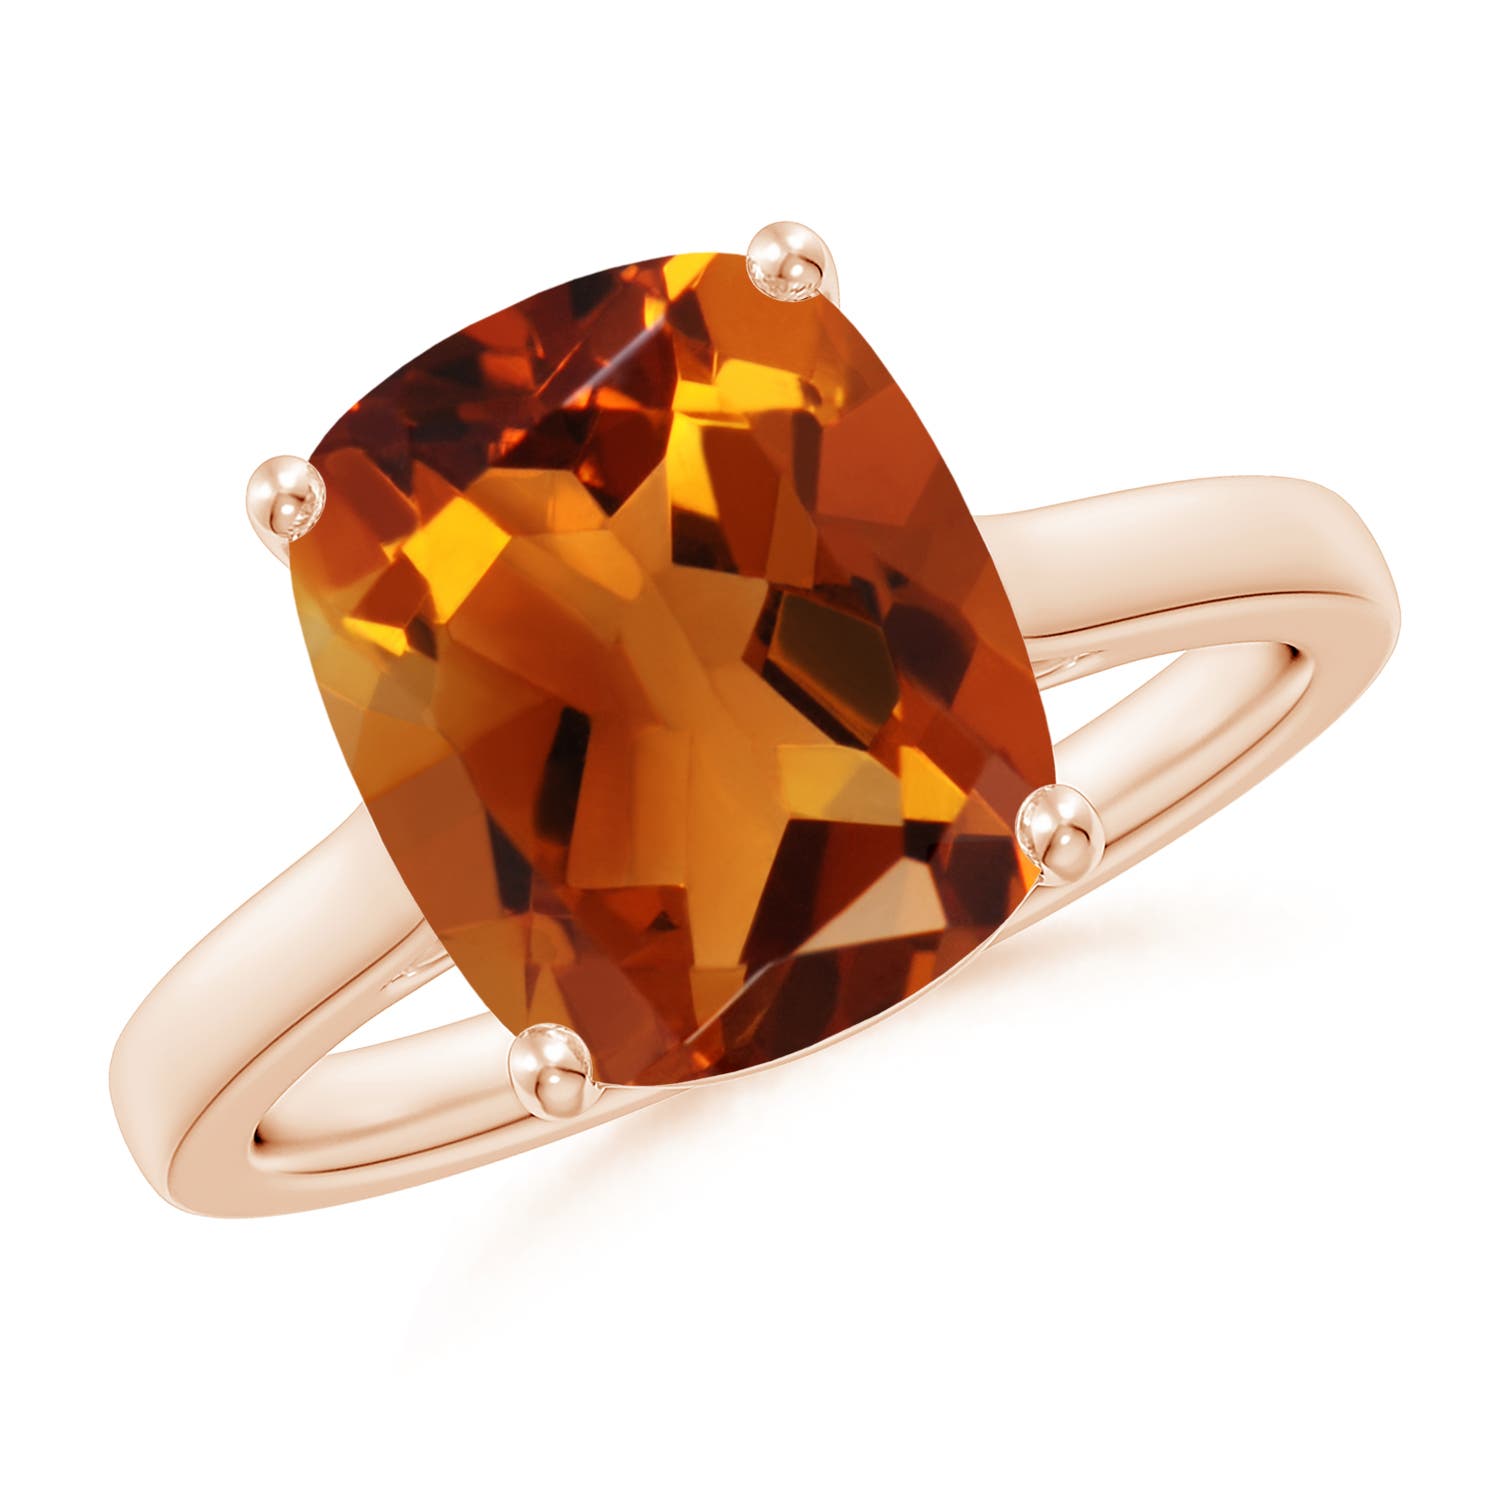 AAAA - Citrine / 3.73 CT / 14 KT Rose Gold